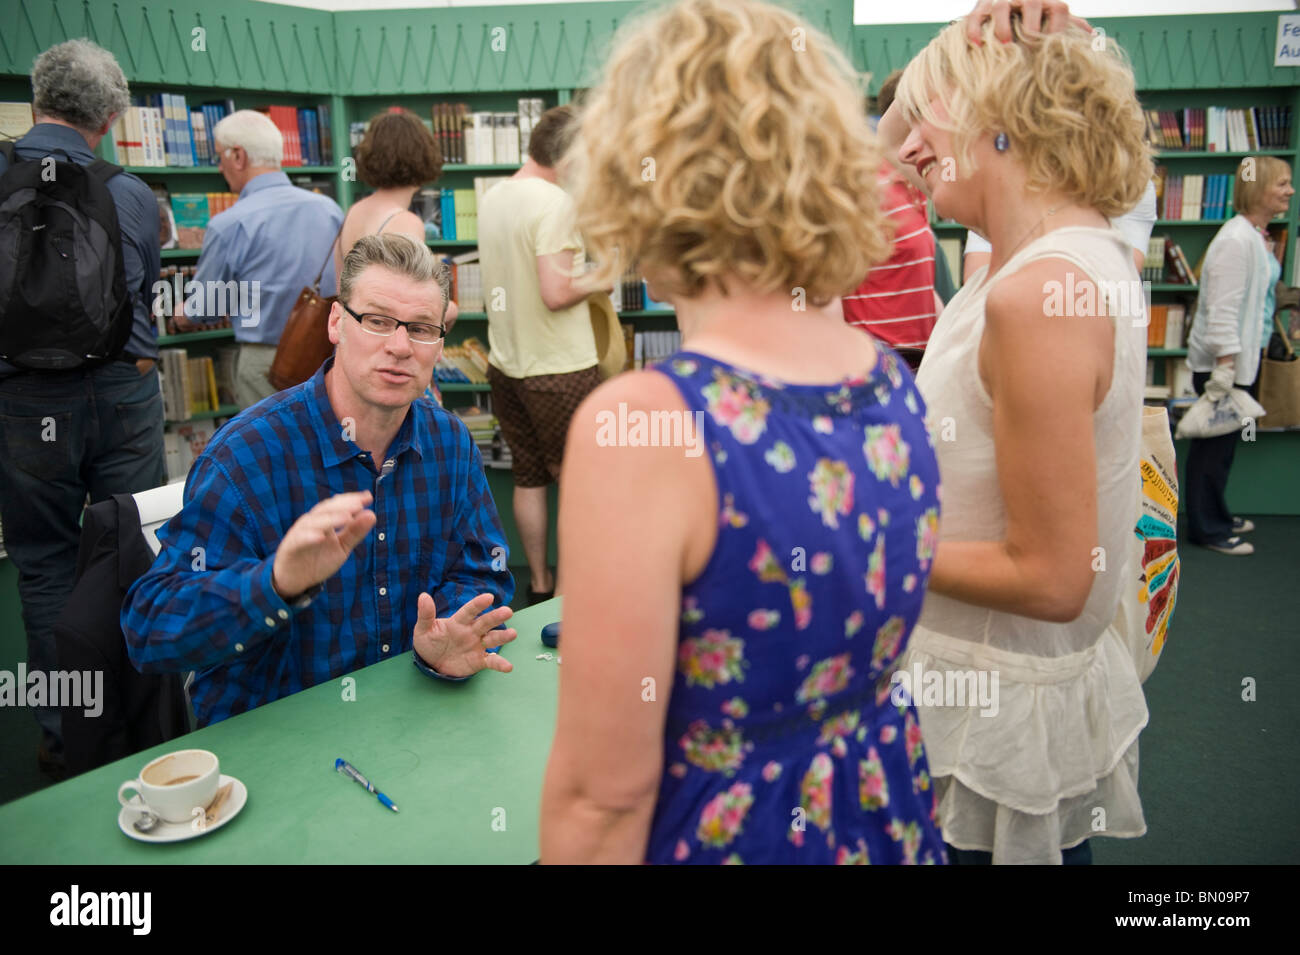 Mark Kermode book signing where authors meet their fans at Hay Festival 2010 Hay on Wye Powys Wales UK Stock Photo